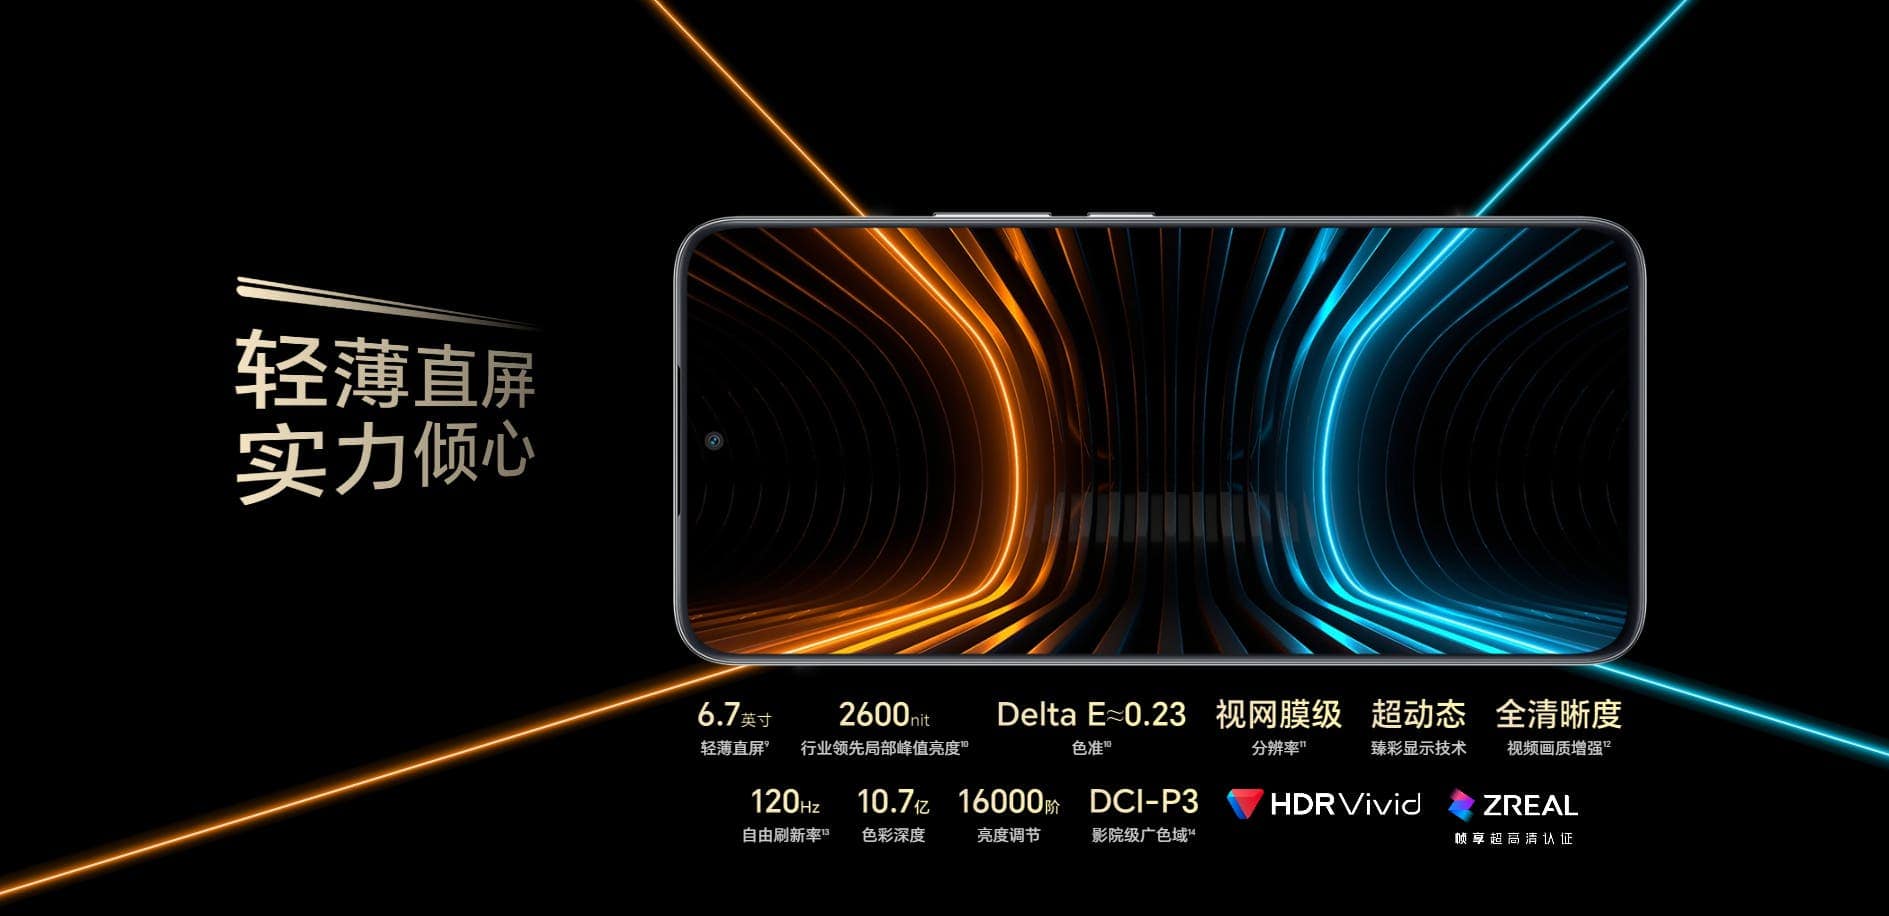 Display features of Honor 90 GT